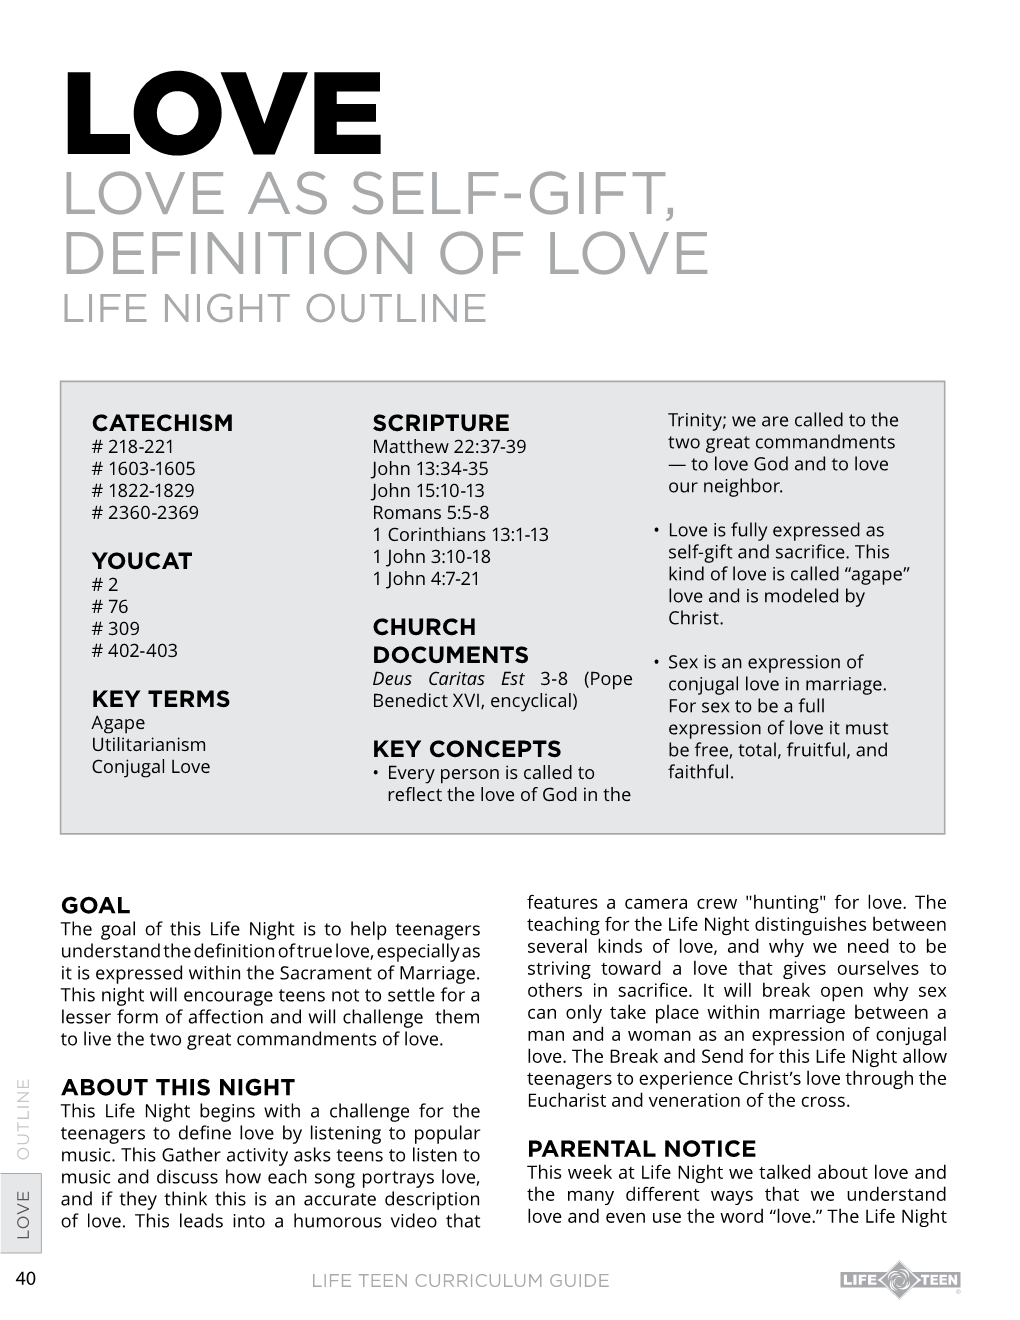 Love As Self-Gift, Definition of Love Life Night Outline